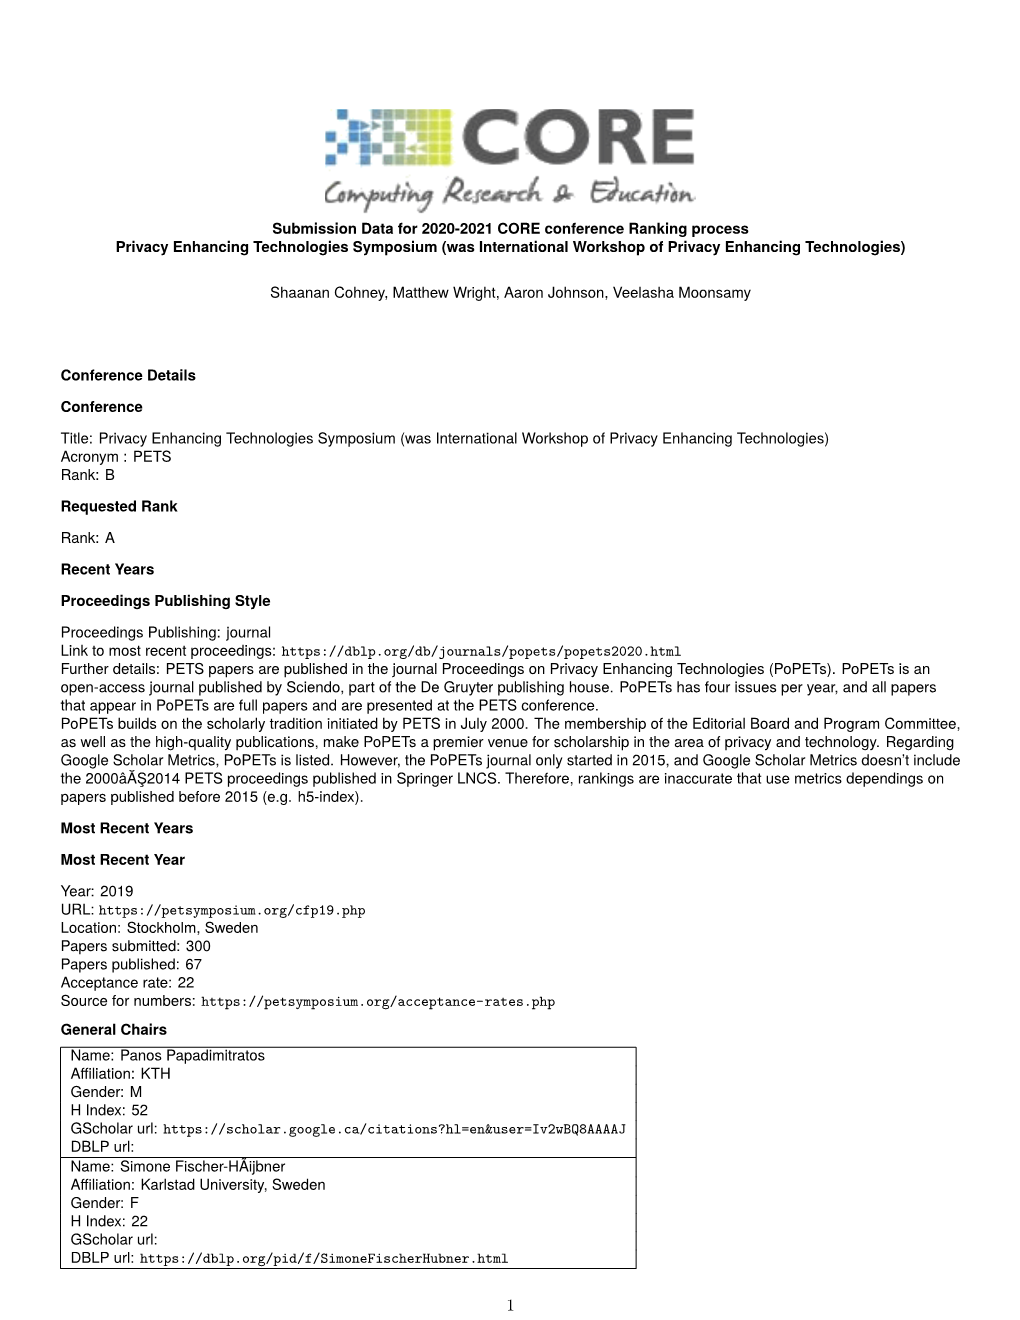 Submission Data for 2020-2021 CORE Conference Ranking Process Privacy Enhancing Technologies Symposium (Was International Workshop of Privacy Enhancing Technologies)